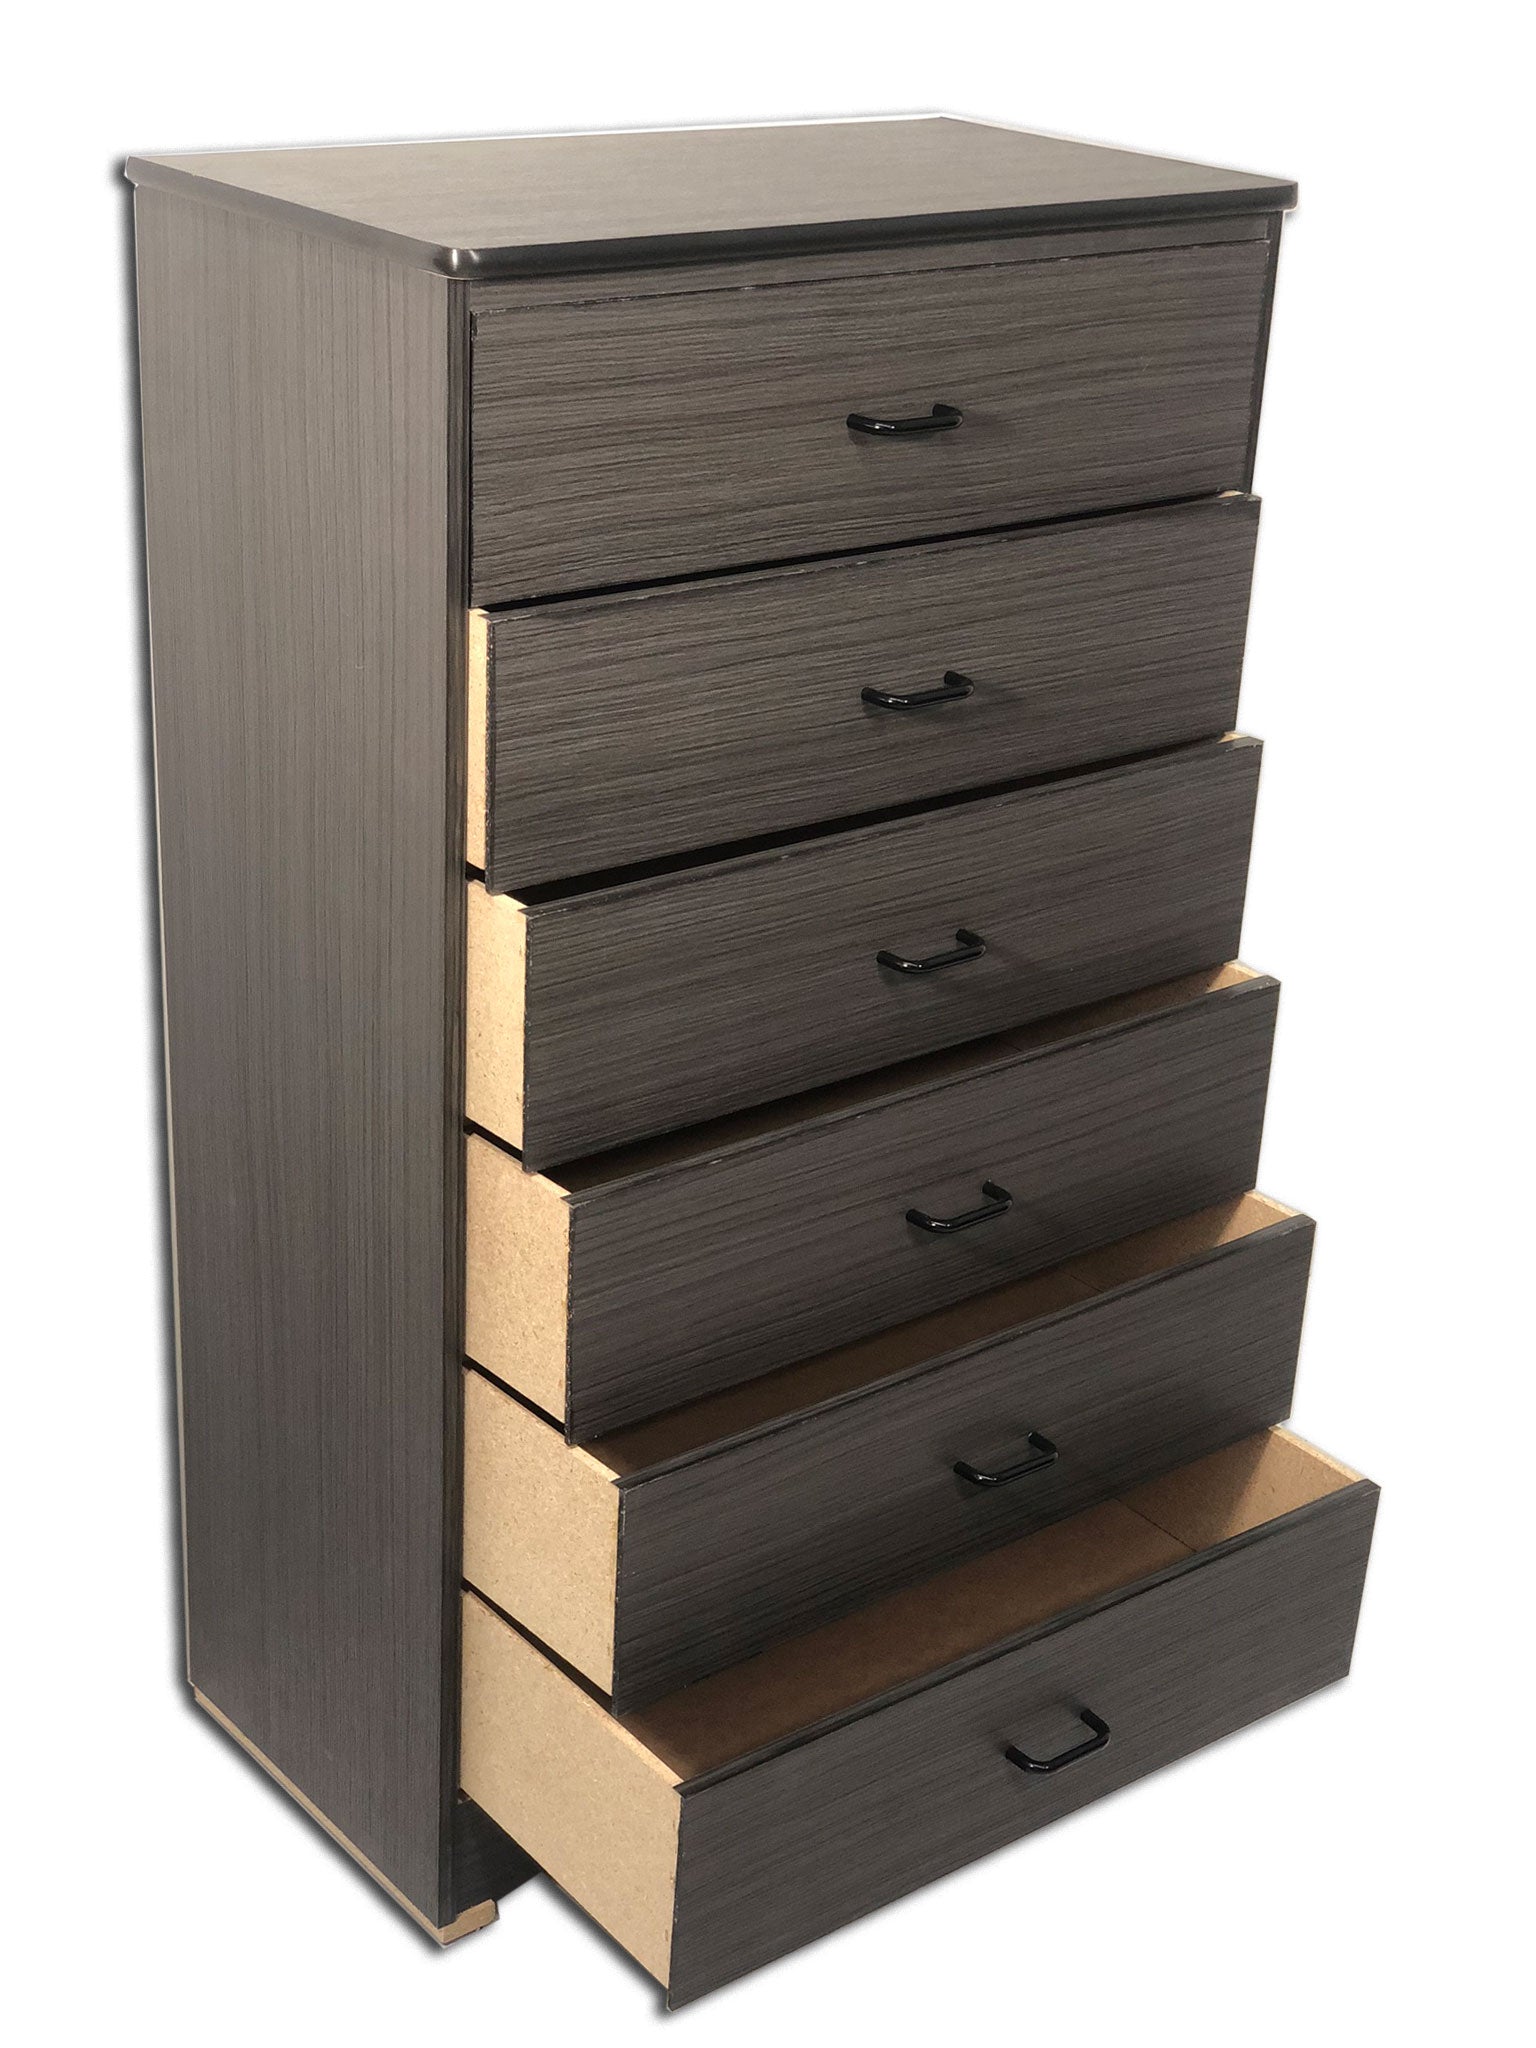 Affordable Grey Chest - 4, 5, & 6 Drawers option